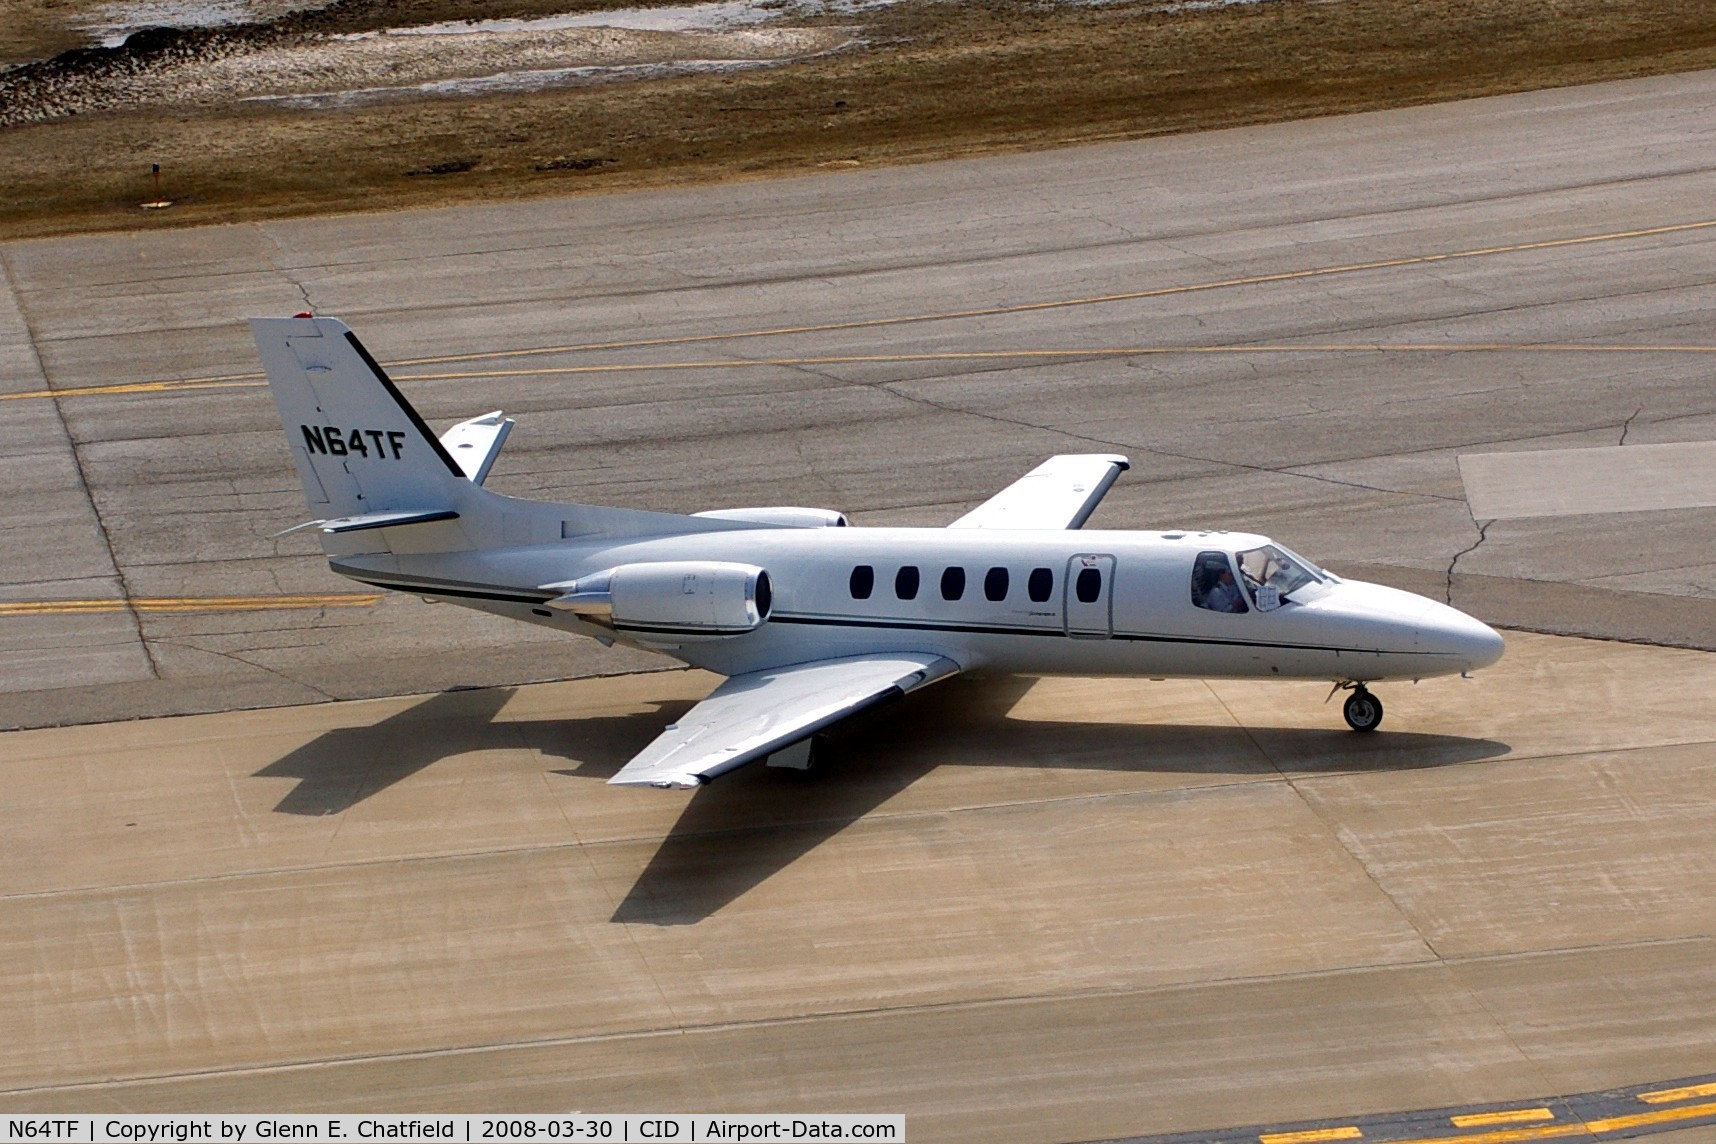 N64TF, 1979 Cessna 550 Citation II C/N 550-0064, Just arrived, taxiing past the tower to Landmark